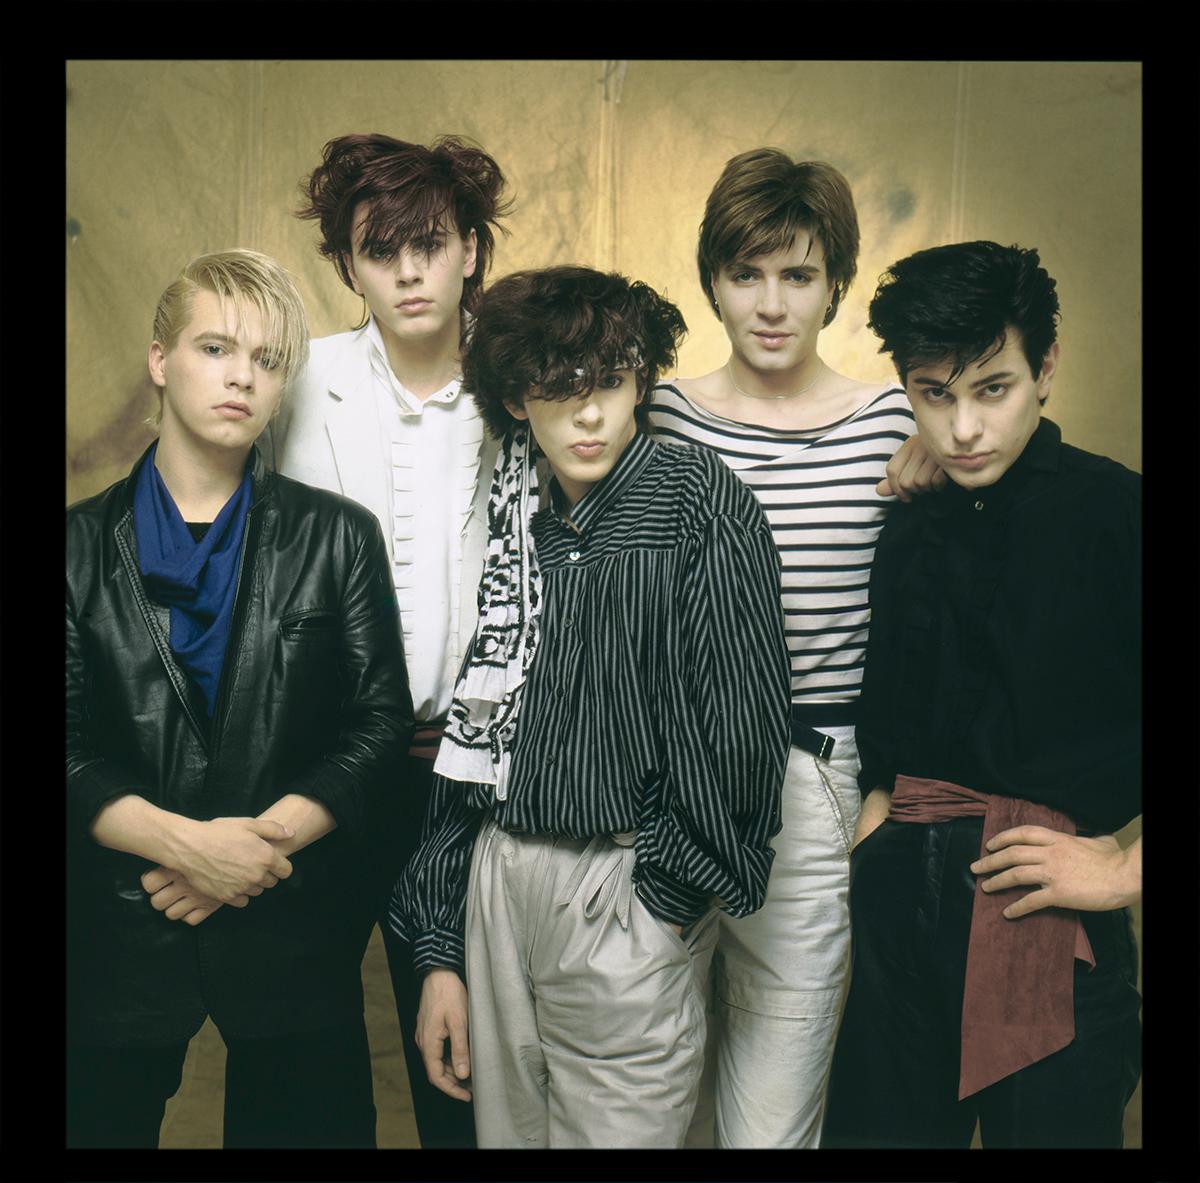 Signed limited edition print of Duran Duran taken in 1979 by Simon Fowler in the UK

Simon recalls "This was my first shoot with the boys. These boys spent as much time around the mirror as they did in front of the camera. Really great blokes and